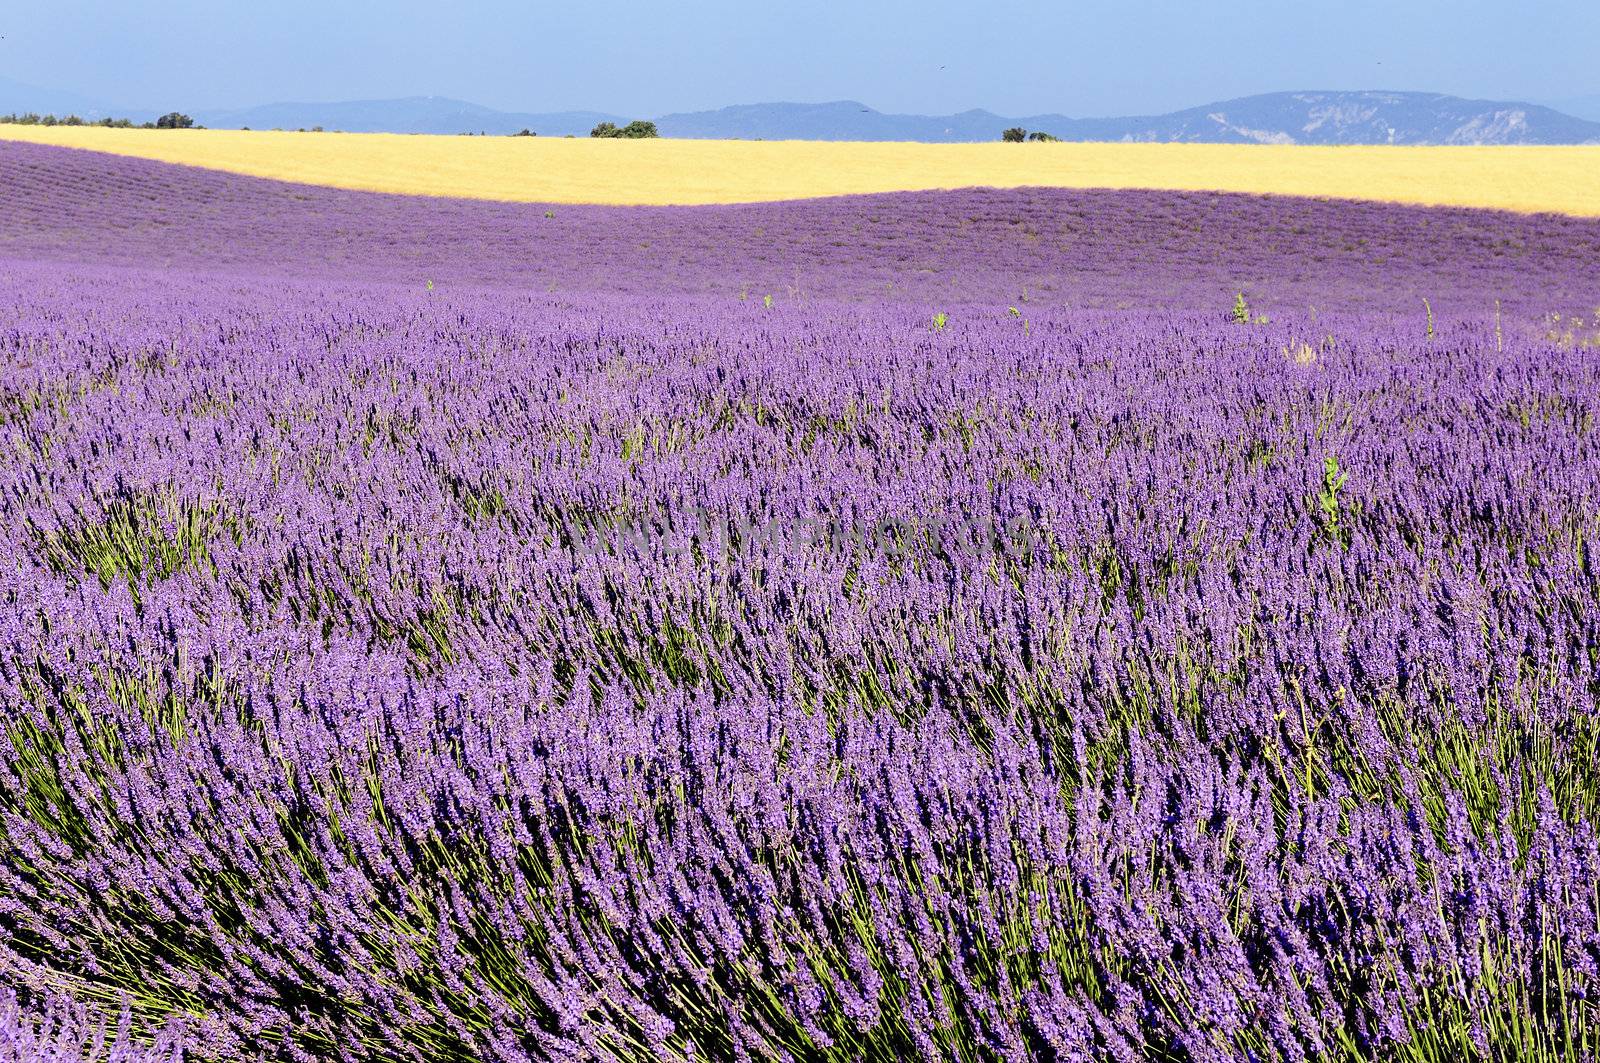 mage shows a lavender field in the region of Provence, southern France